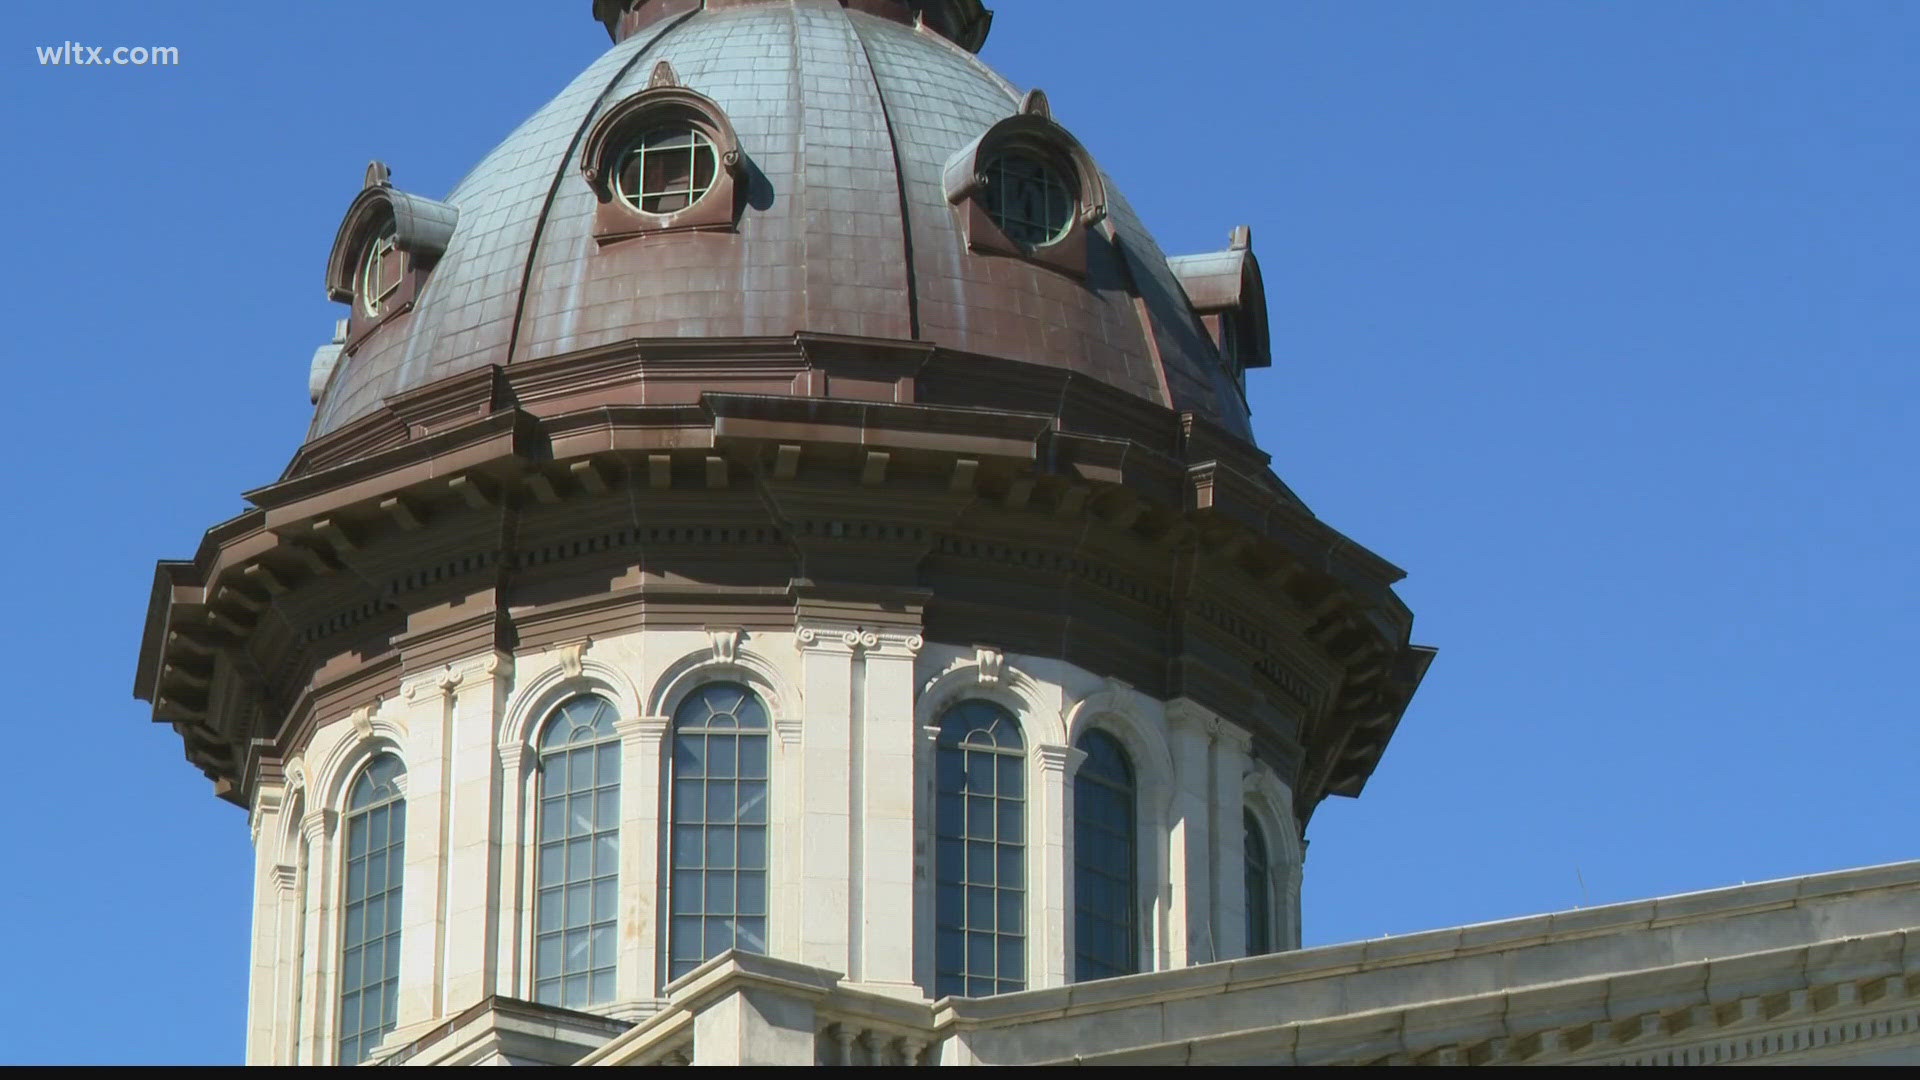 Teachers and state employees would get a salary boost under a budget plan passed by the state Senate.